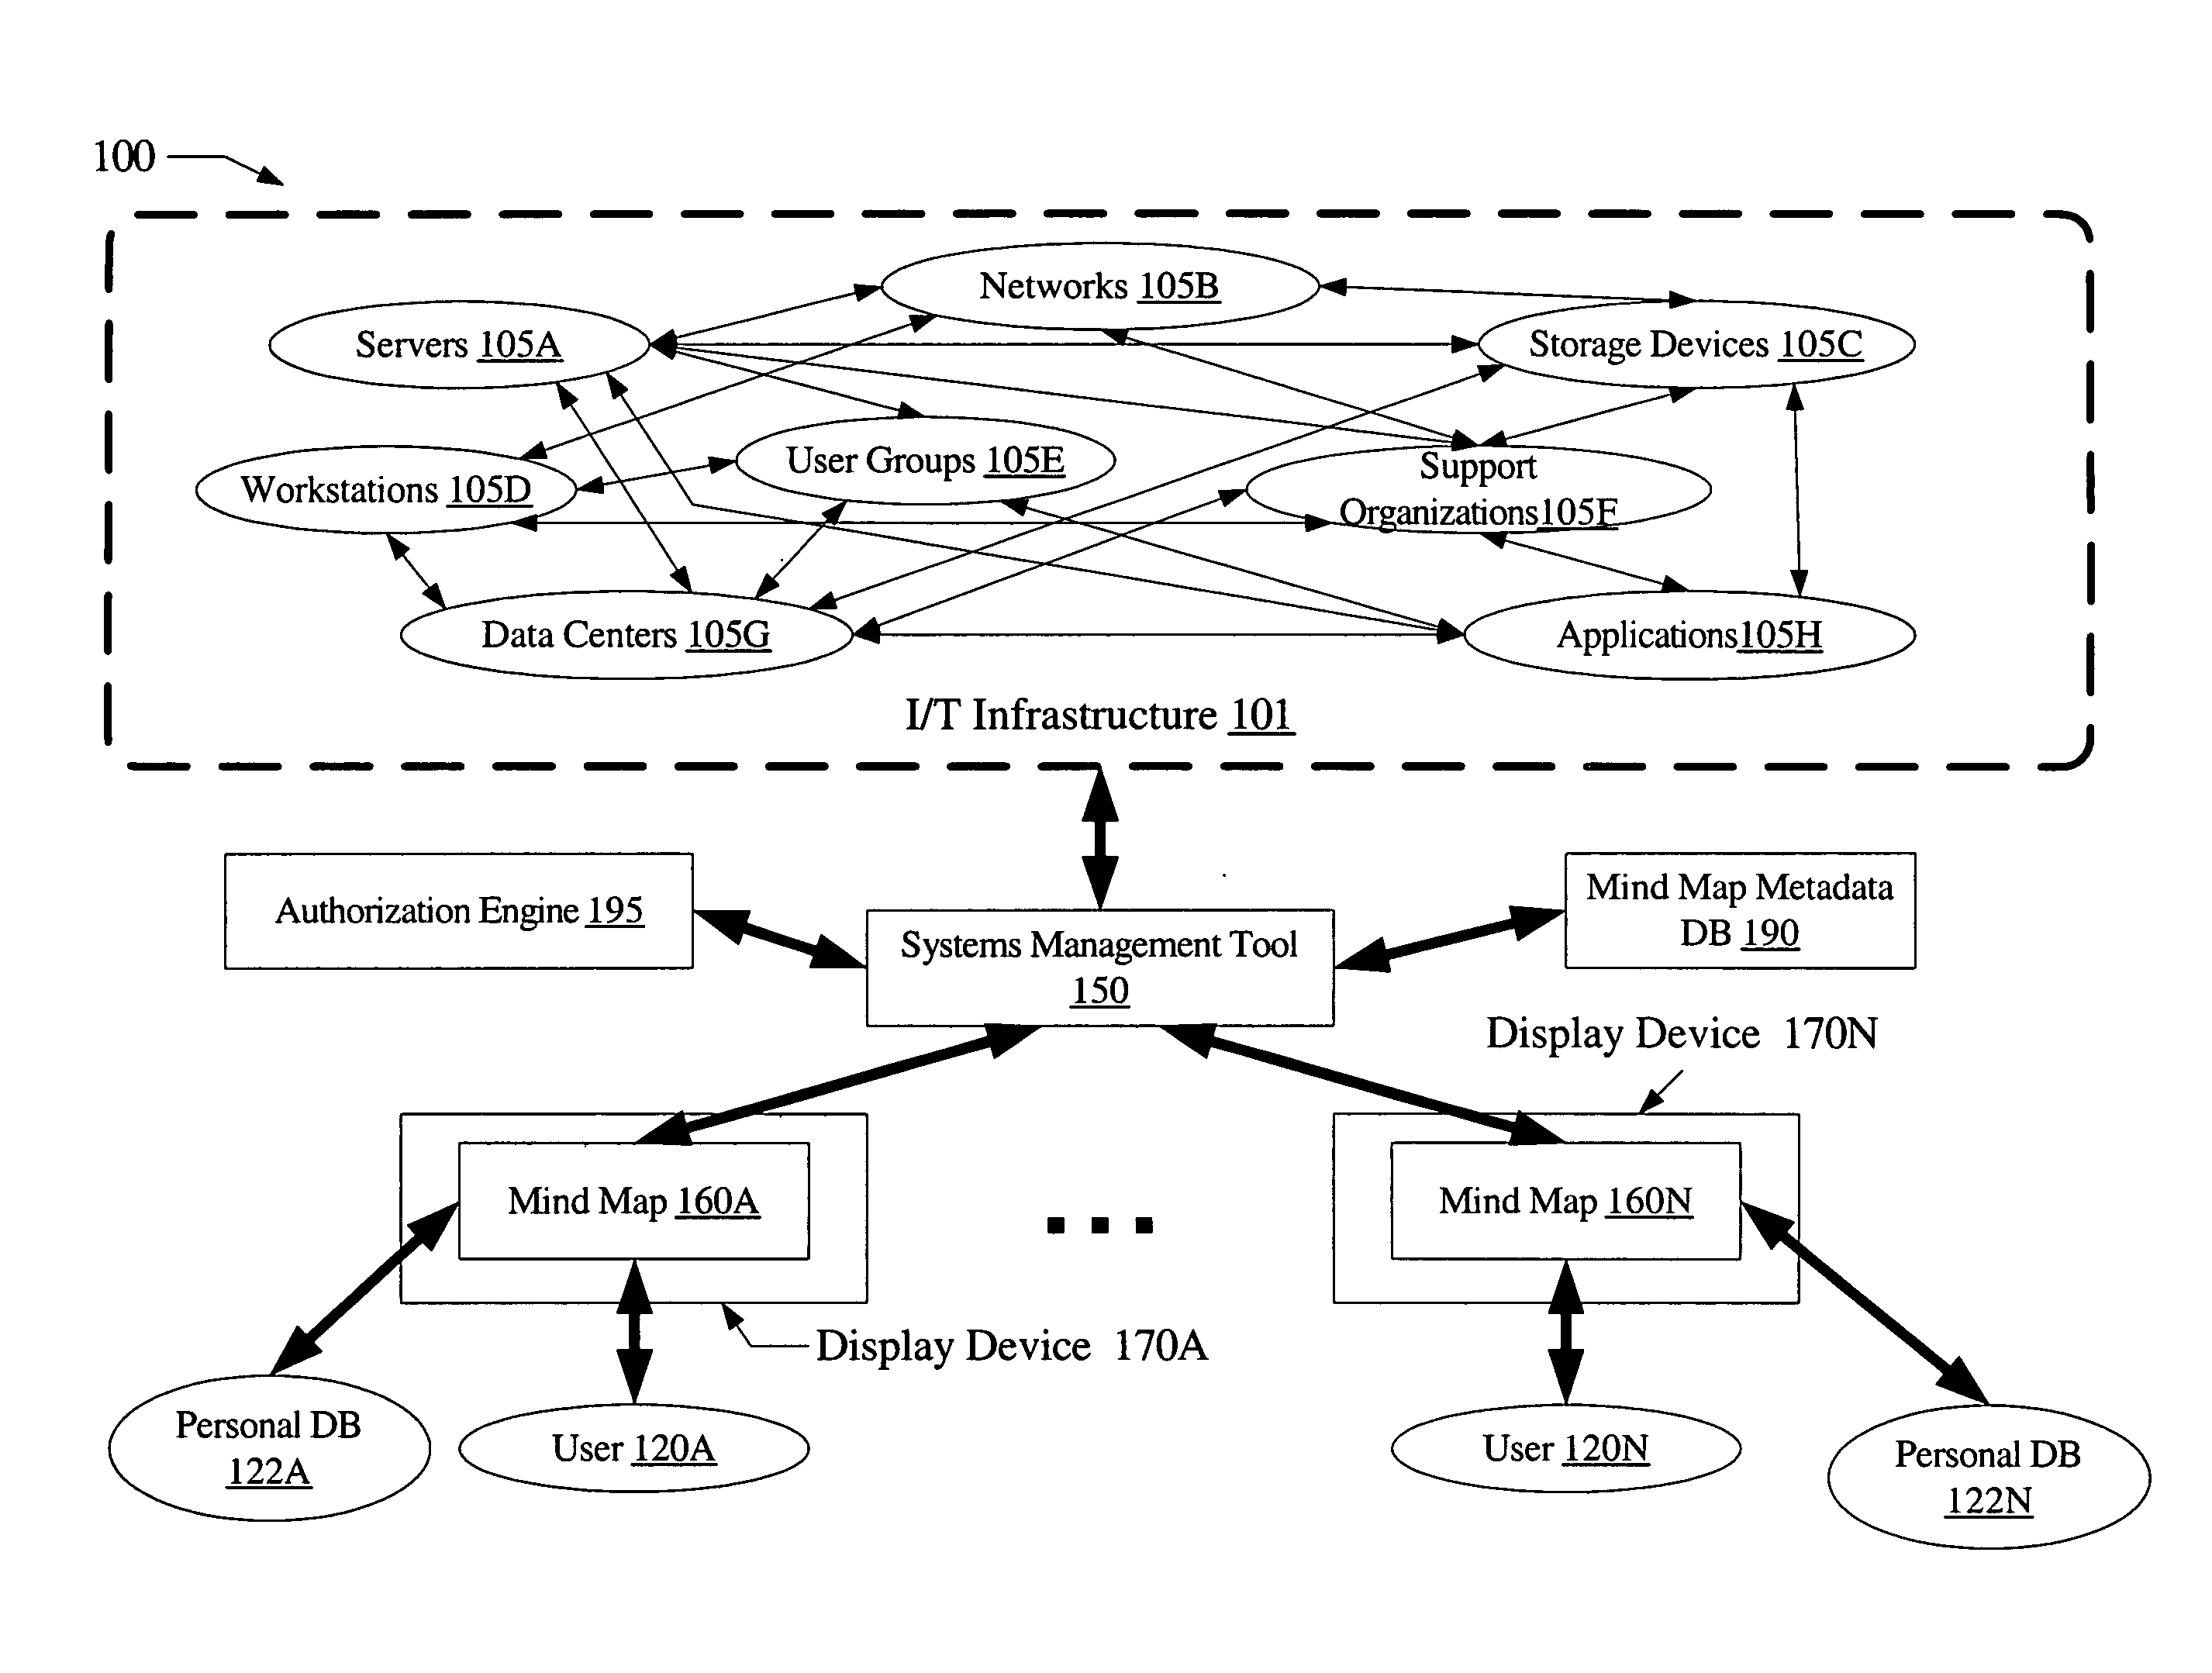 Computer systems management using mind map techniques